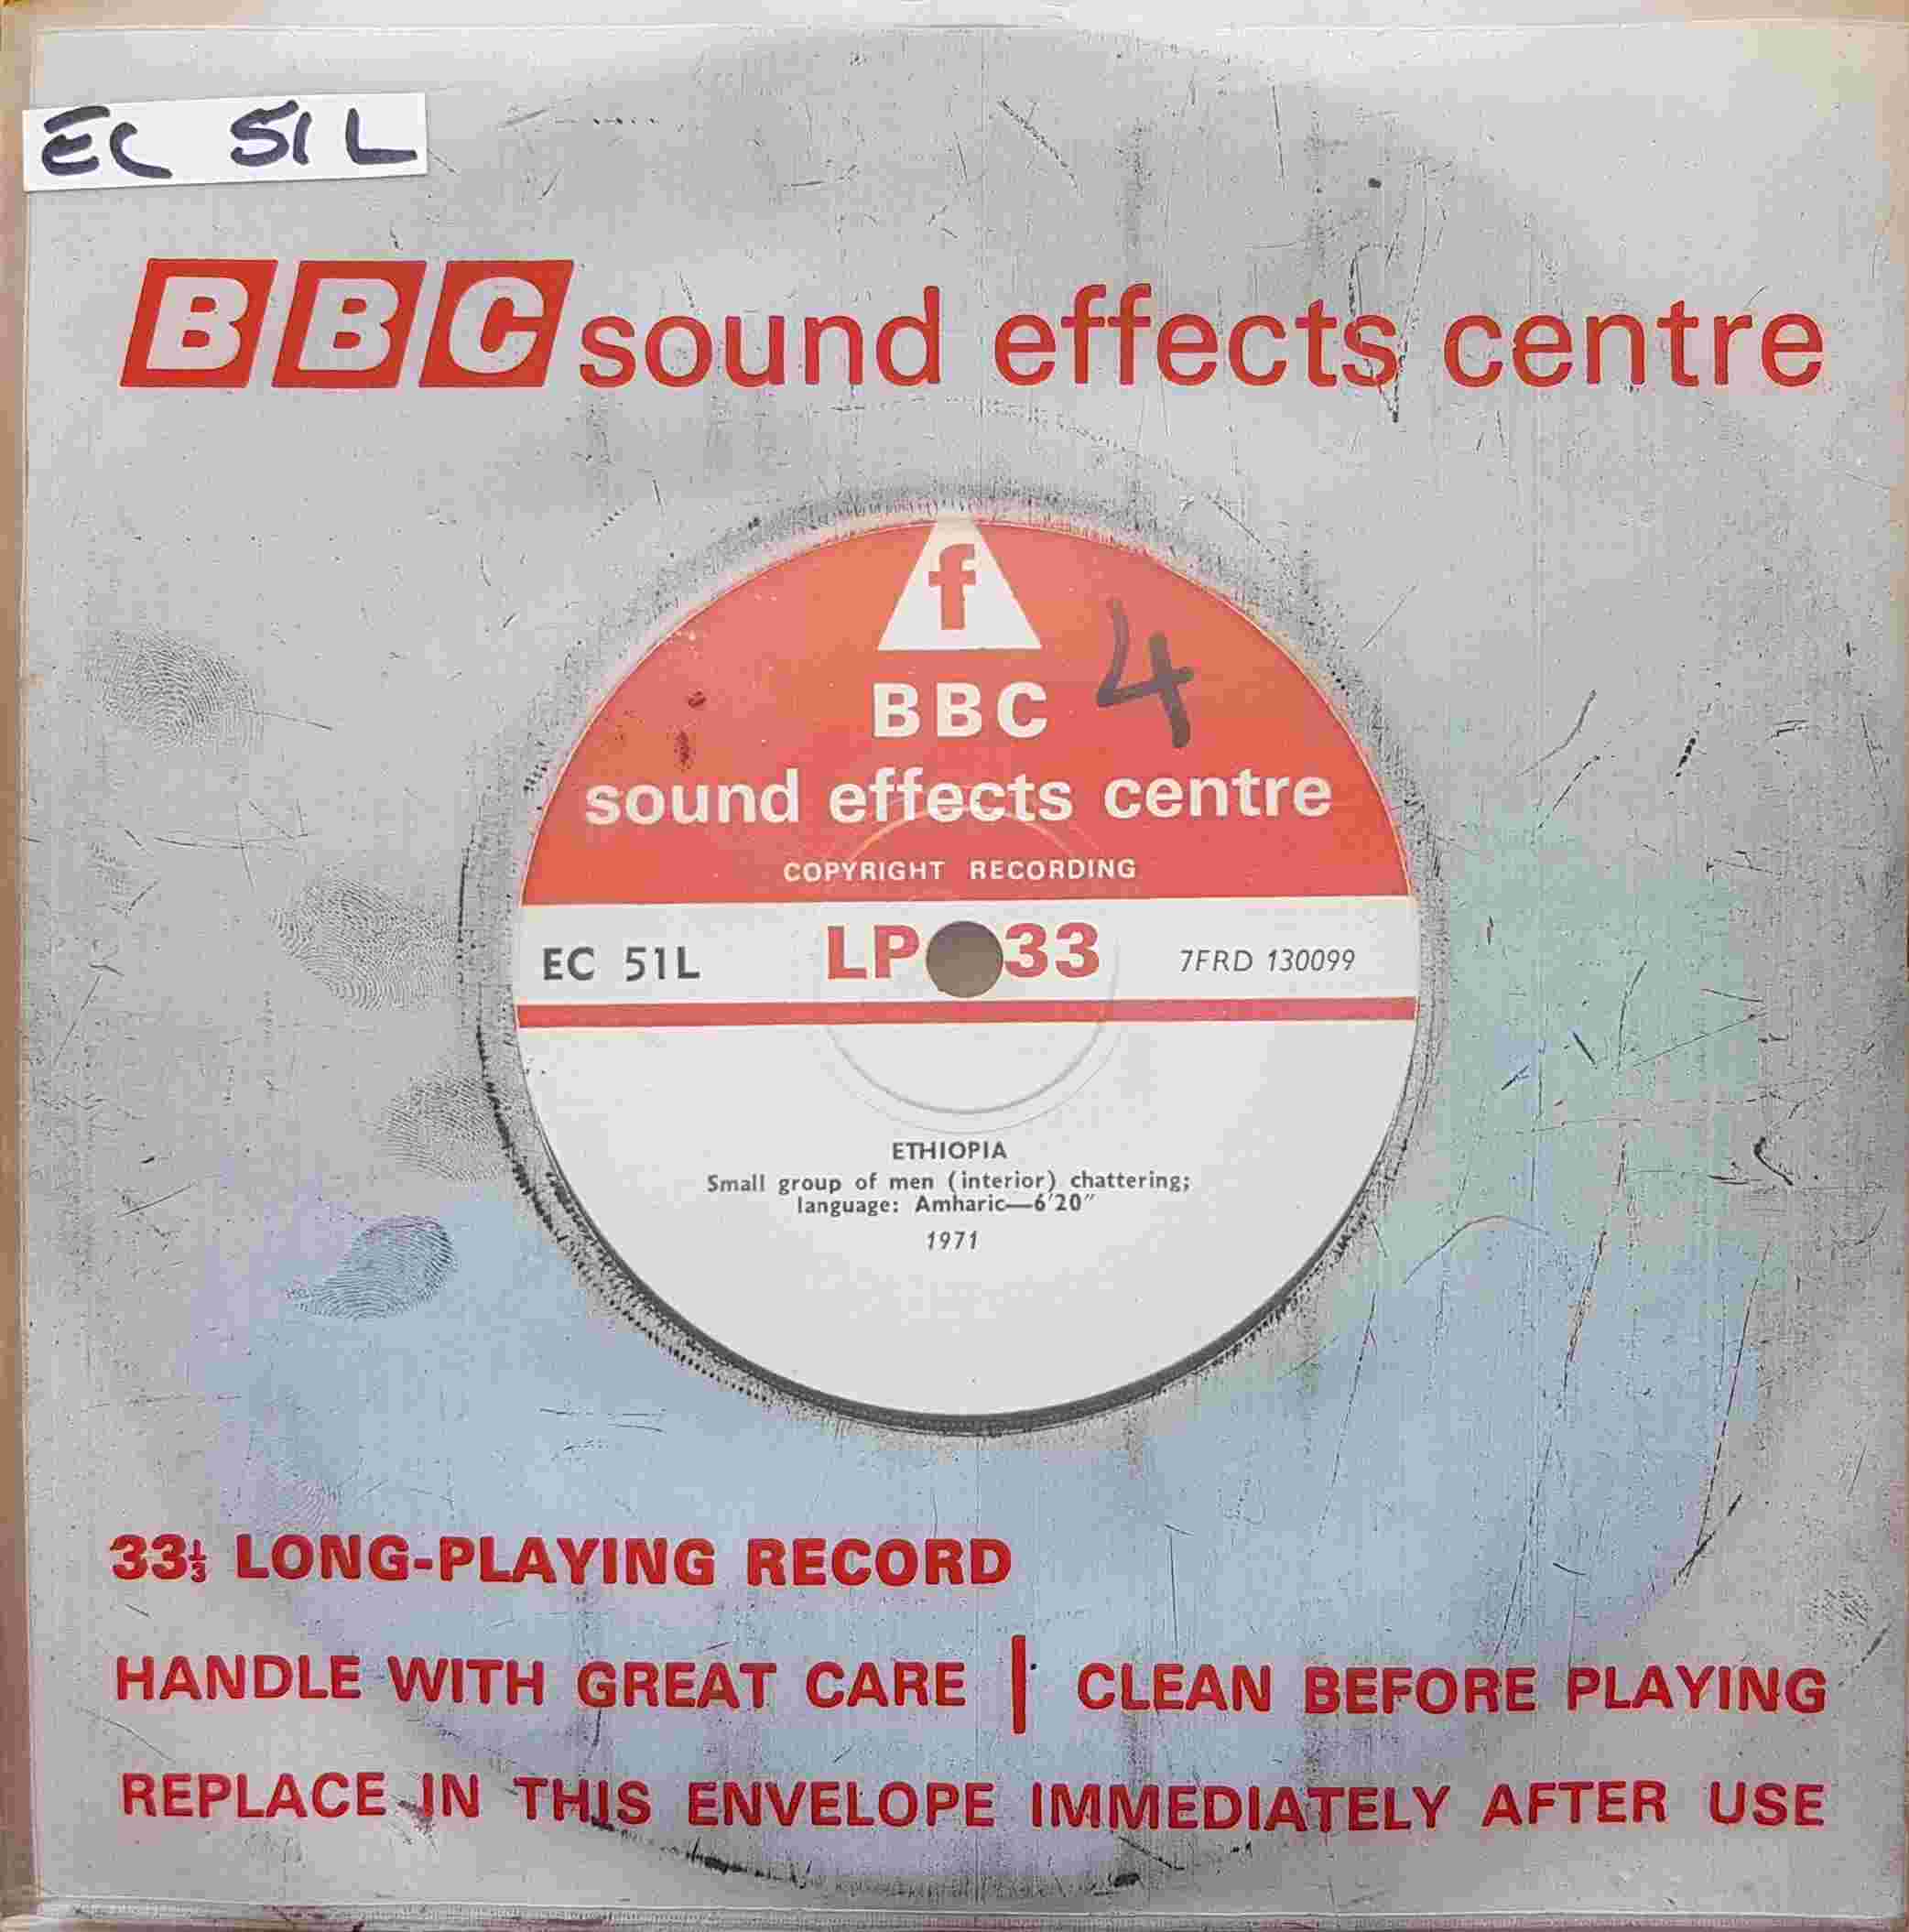 Picture of EC 51L Ethiopia by artist Not registered from the BBC singles - Records and Tapes library